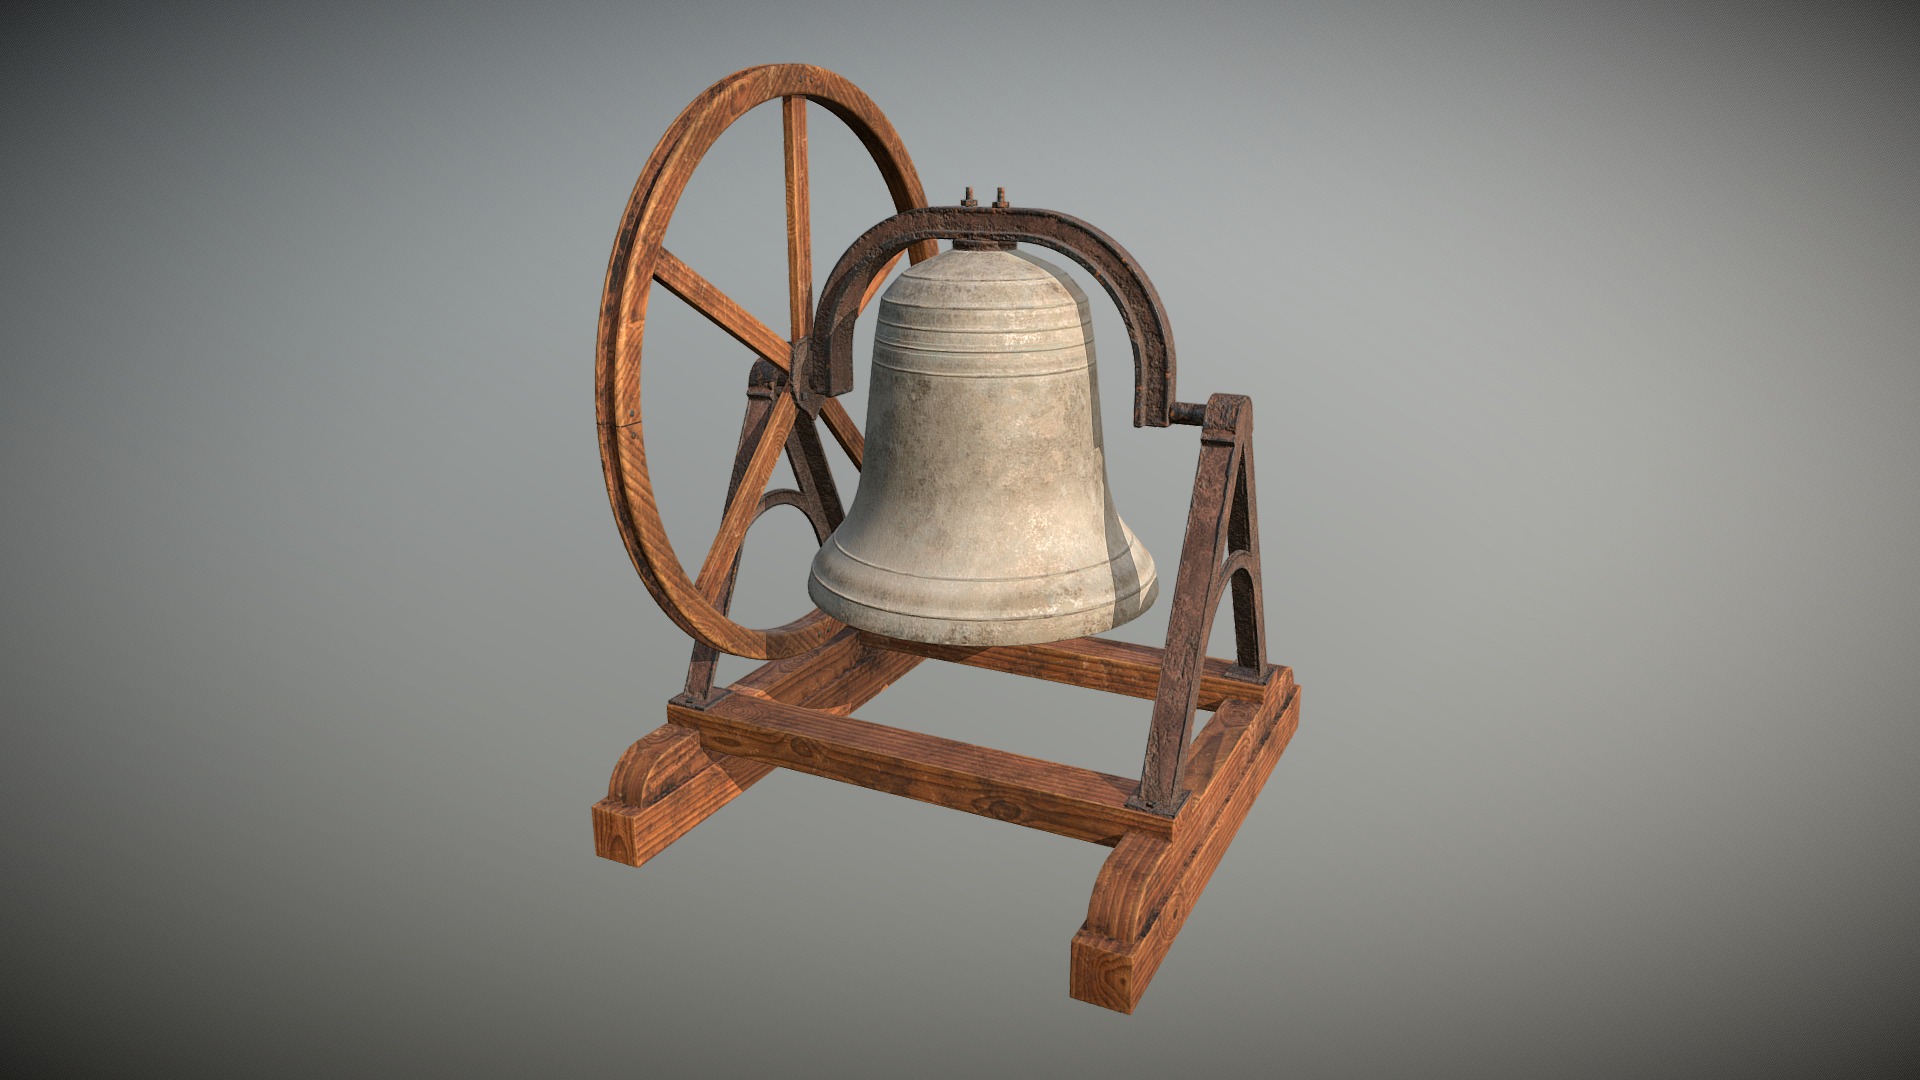 3D model Town Bell - This is a 3D model of the Town Bell. The 3D model is about a wooden chair with a metal handle.